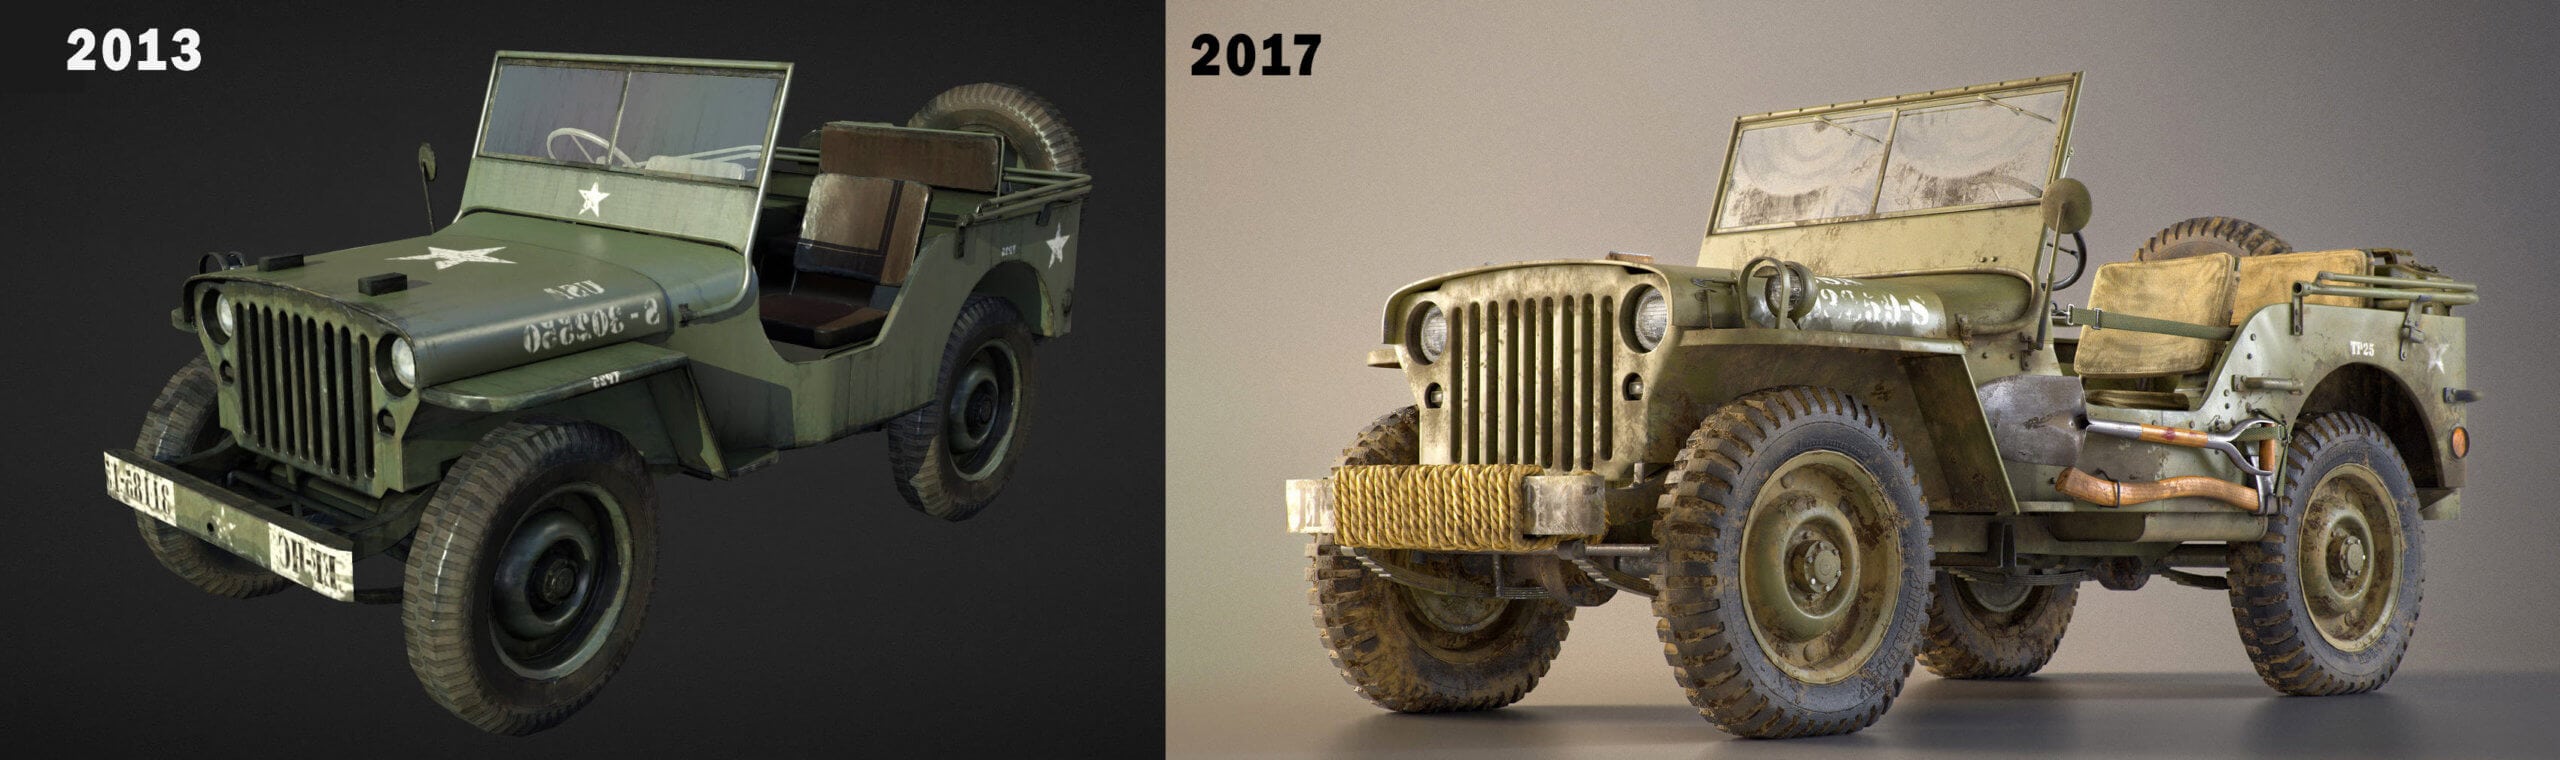 COmparison of a 3D asset Jeep Willys from the year 2013 and 2017